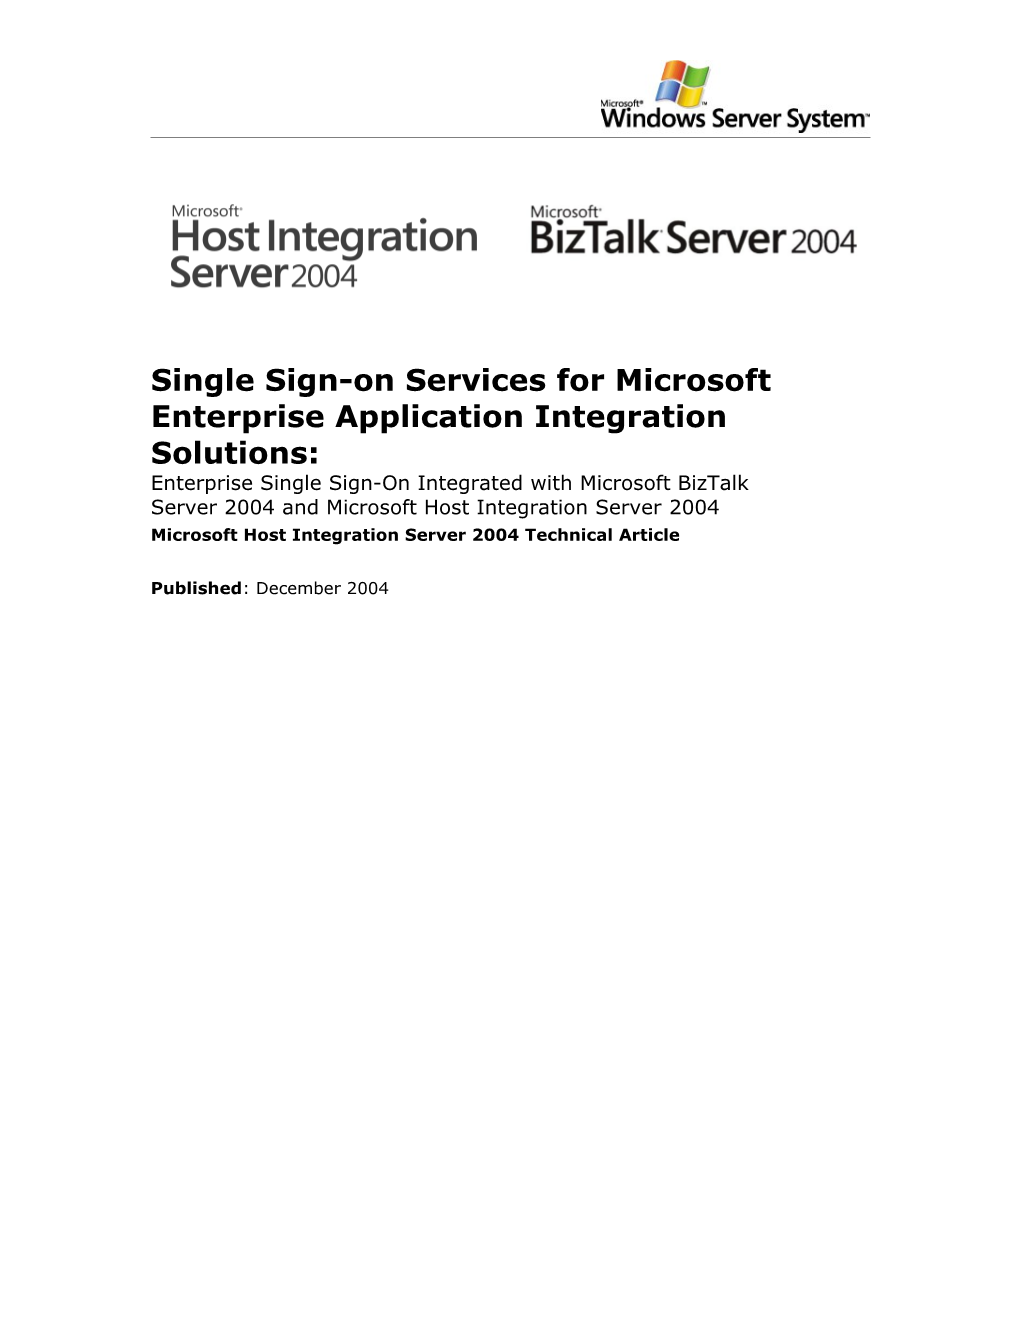 Single Sign-On Services for Microsoft Enterprise Application Integration Solutions